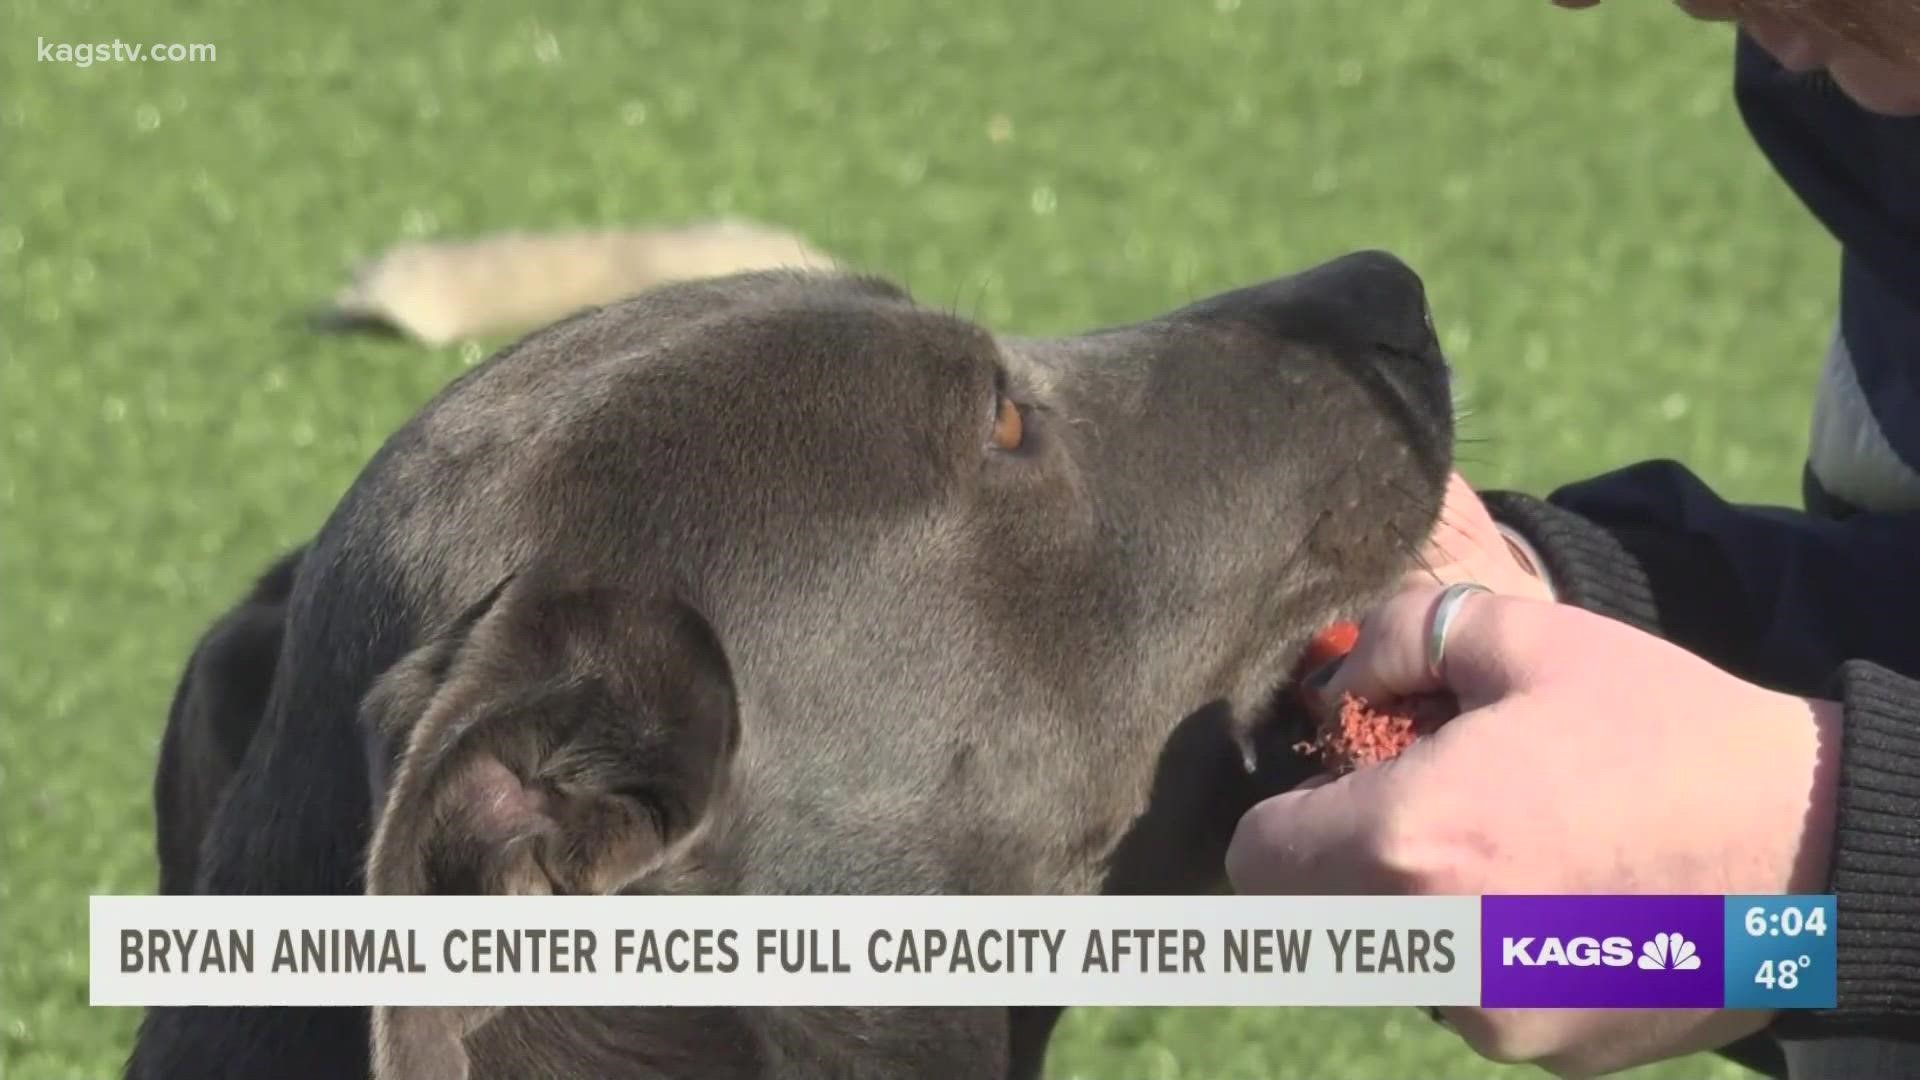 Bryan Animal Center faces full capacity in the new year 